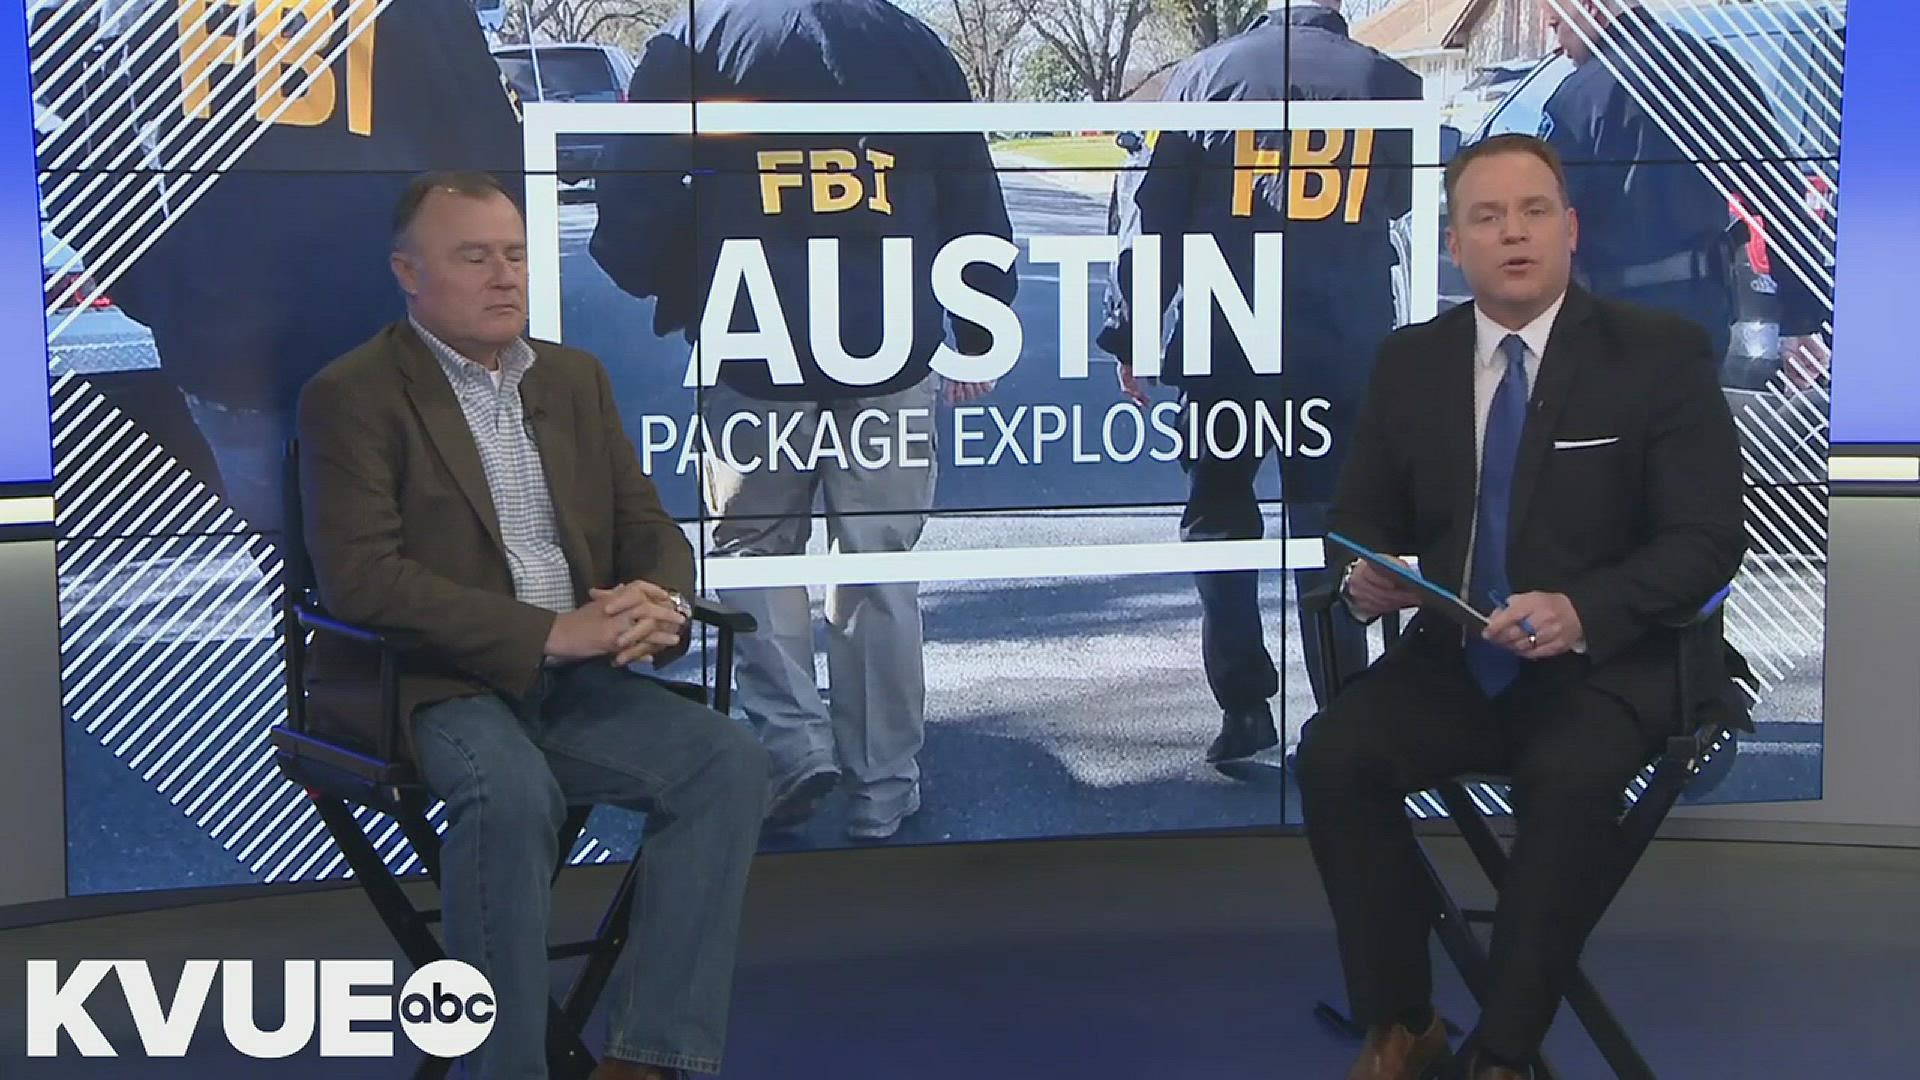 Fred Burton, the chief security officer with geopolitical intelligence platform Stratfor, is known as "one of the world's foremost experts on security, terrorists and terrorist organizations." He joined KVUE's Brian Mays to give his analysis of the March